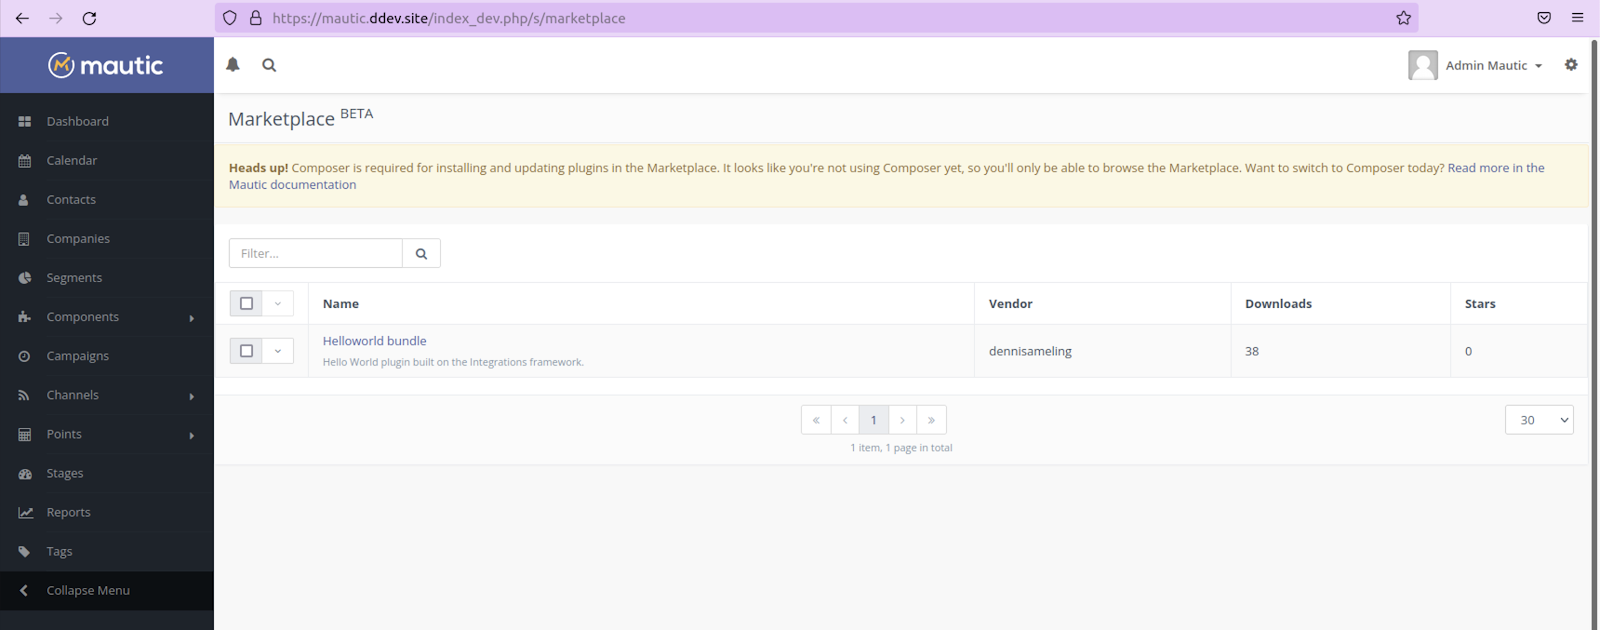 A screenshot of the Mautic Marketplace alerting the user that they need to enable Composer support.